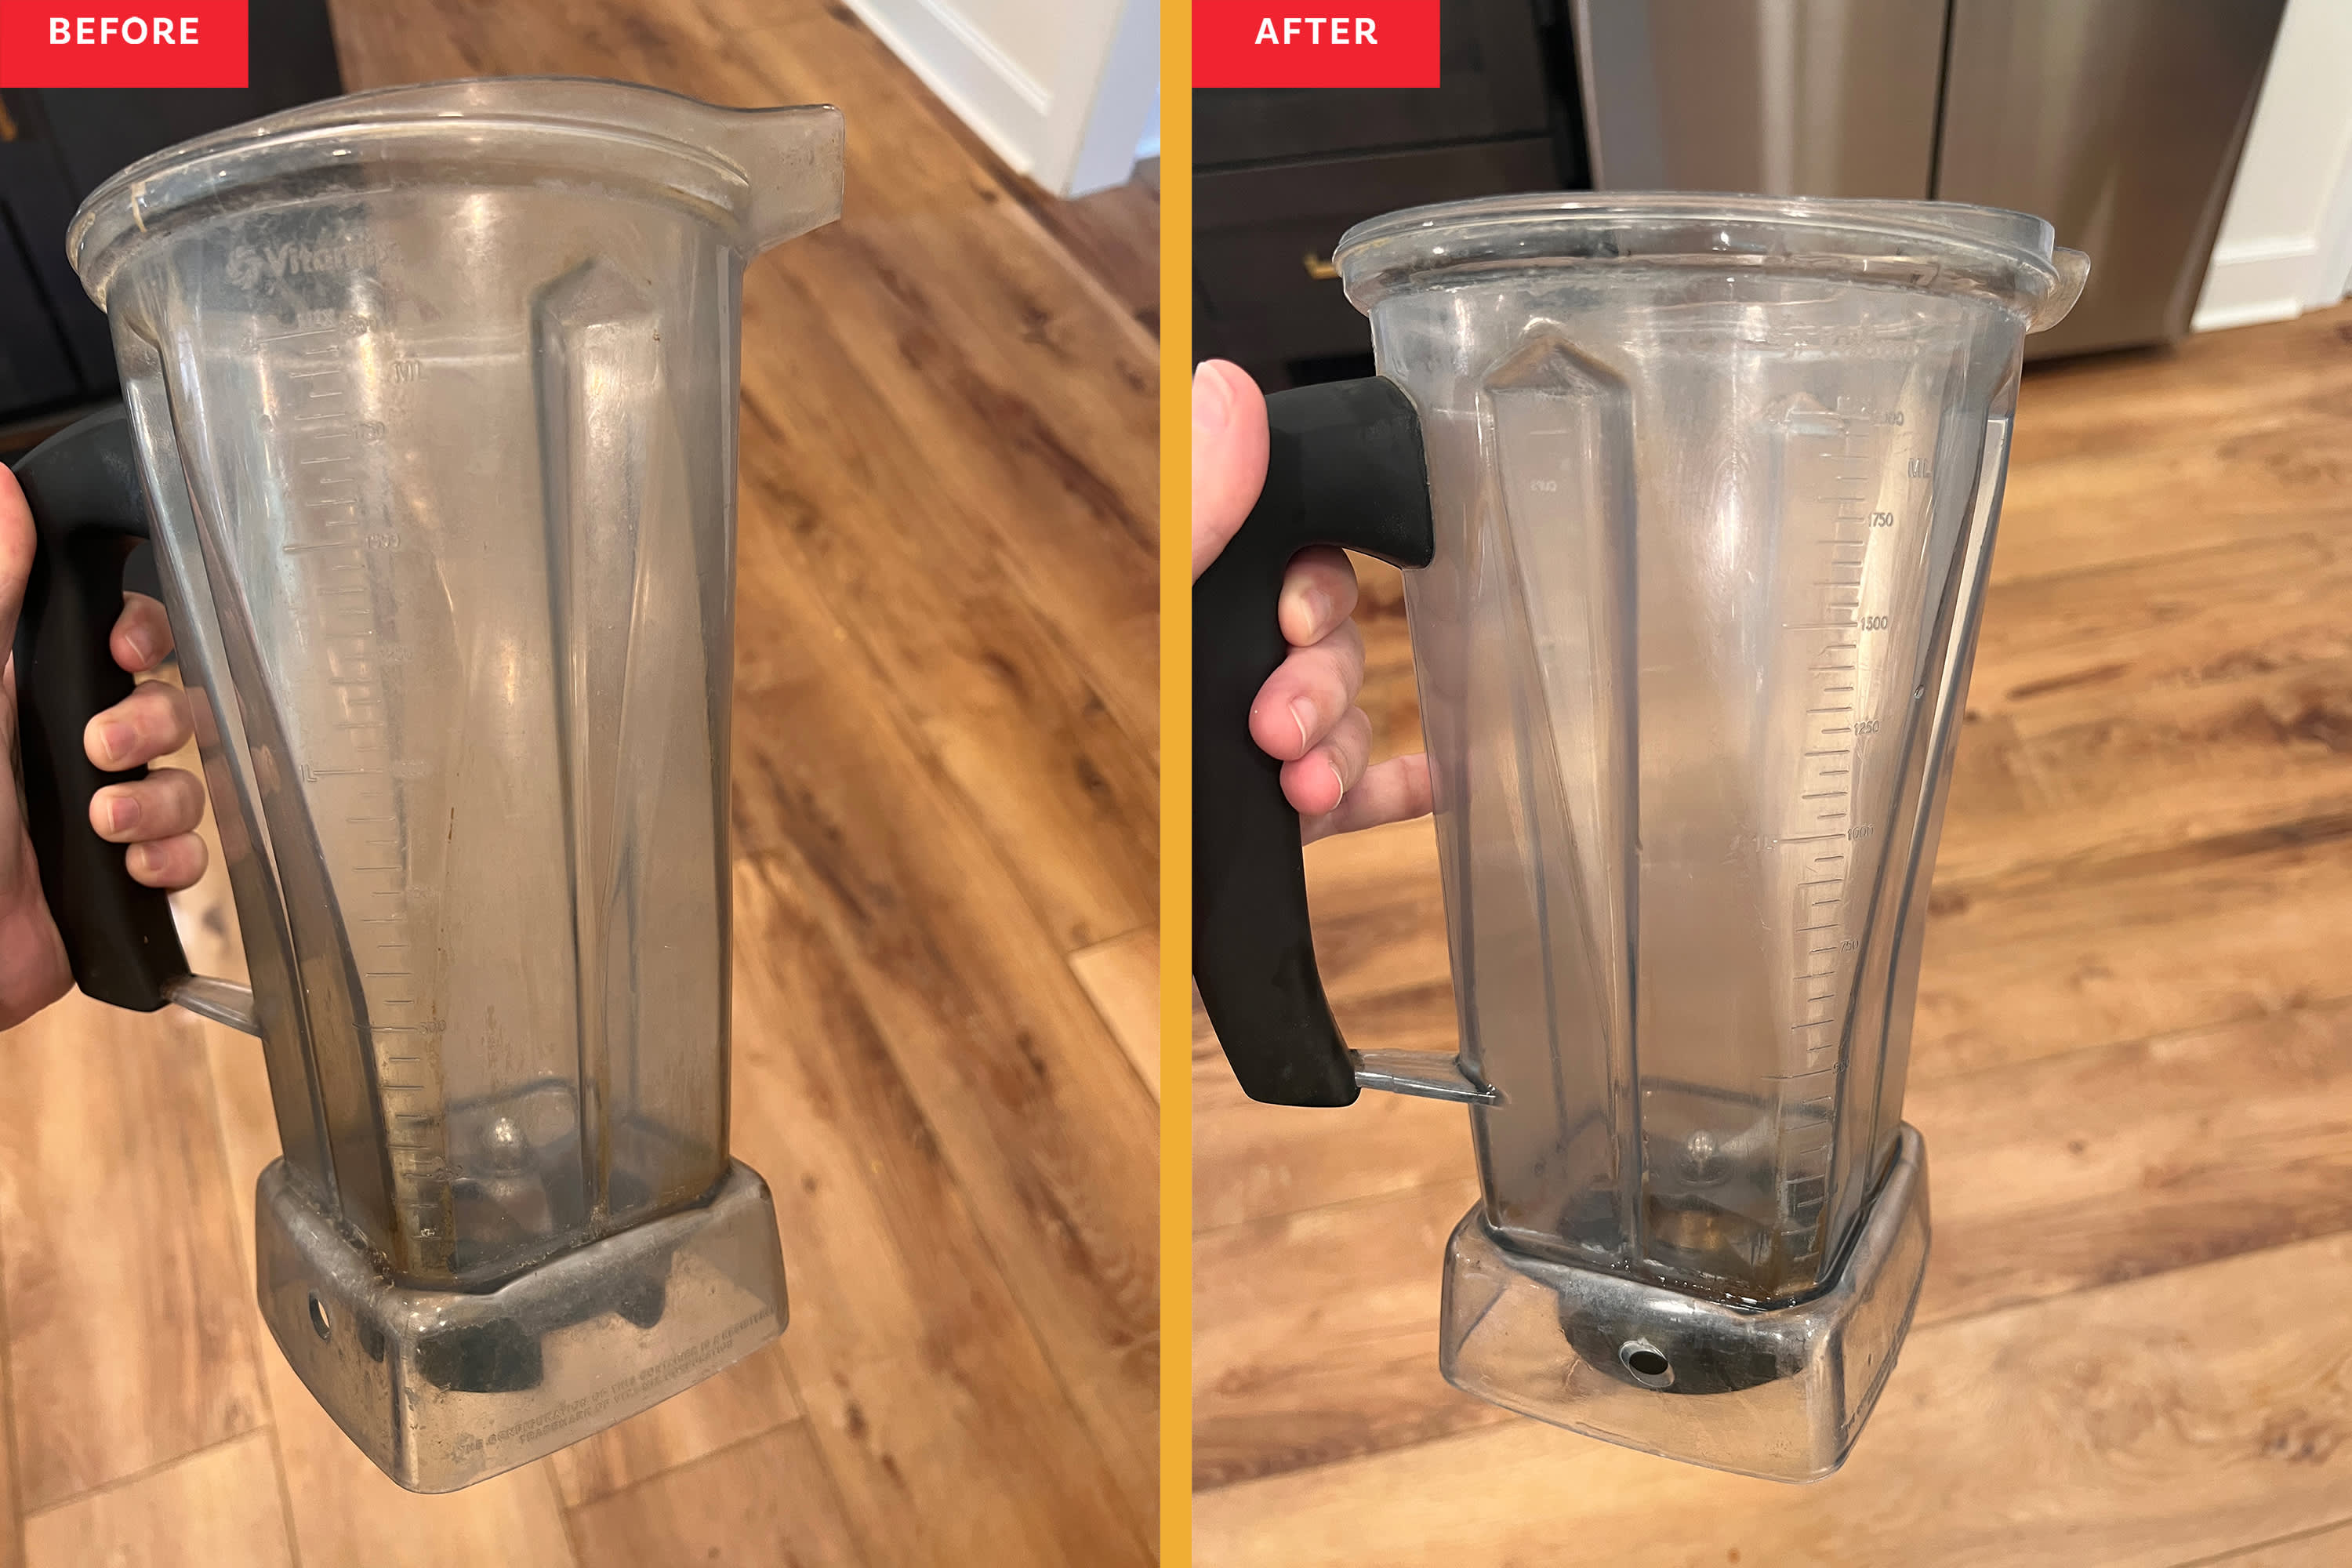 https://cdn.apartmenttherapy.info/image/upload/v1687274531/k/Edit/2023-06-this-method-finally-got-my-cloudy-blender-clear/this-method-finally-got-my-cloudy-blender-clear-before-after-diptych.jpg